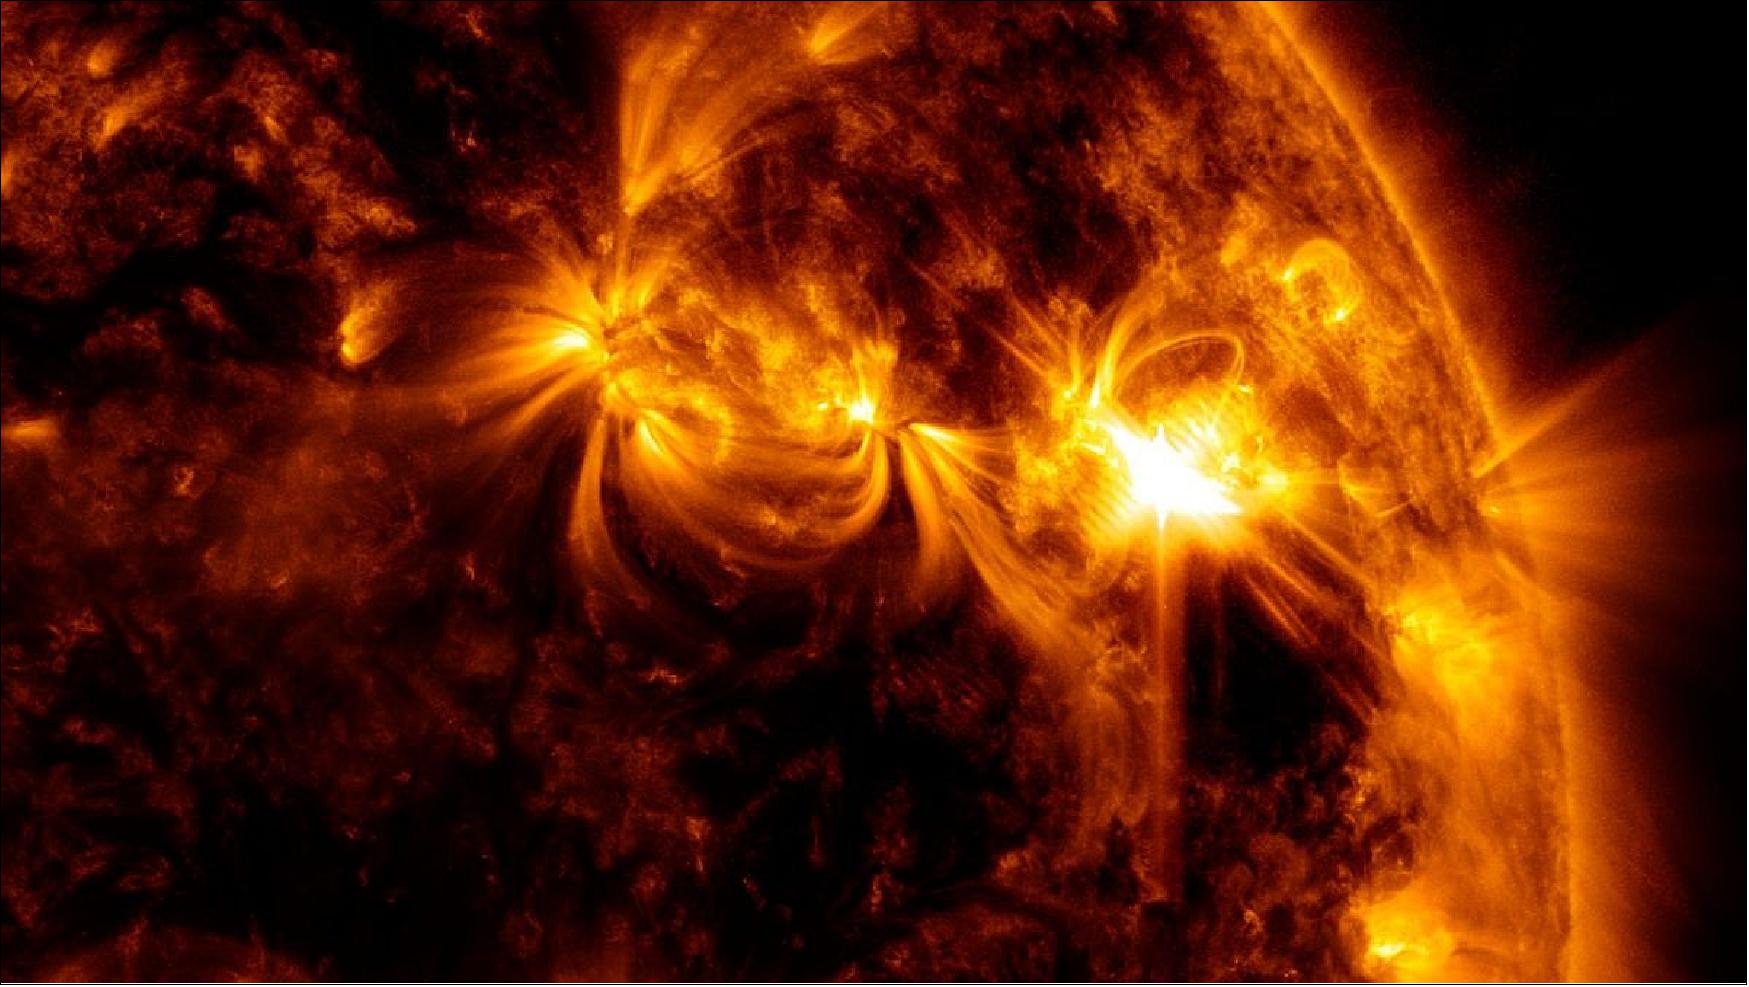 Figure 16: This is a close-up image captured by NASA's Solar Dynamics Observatory of today's solar flare. The image shows a subset of extreme ultraviolet light that highlights the extremely hot material in flares and which is colorized in SDO channel colors 131 and 171 (image credit: NASA/SDO)